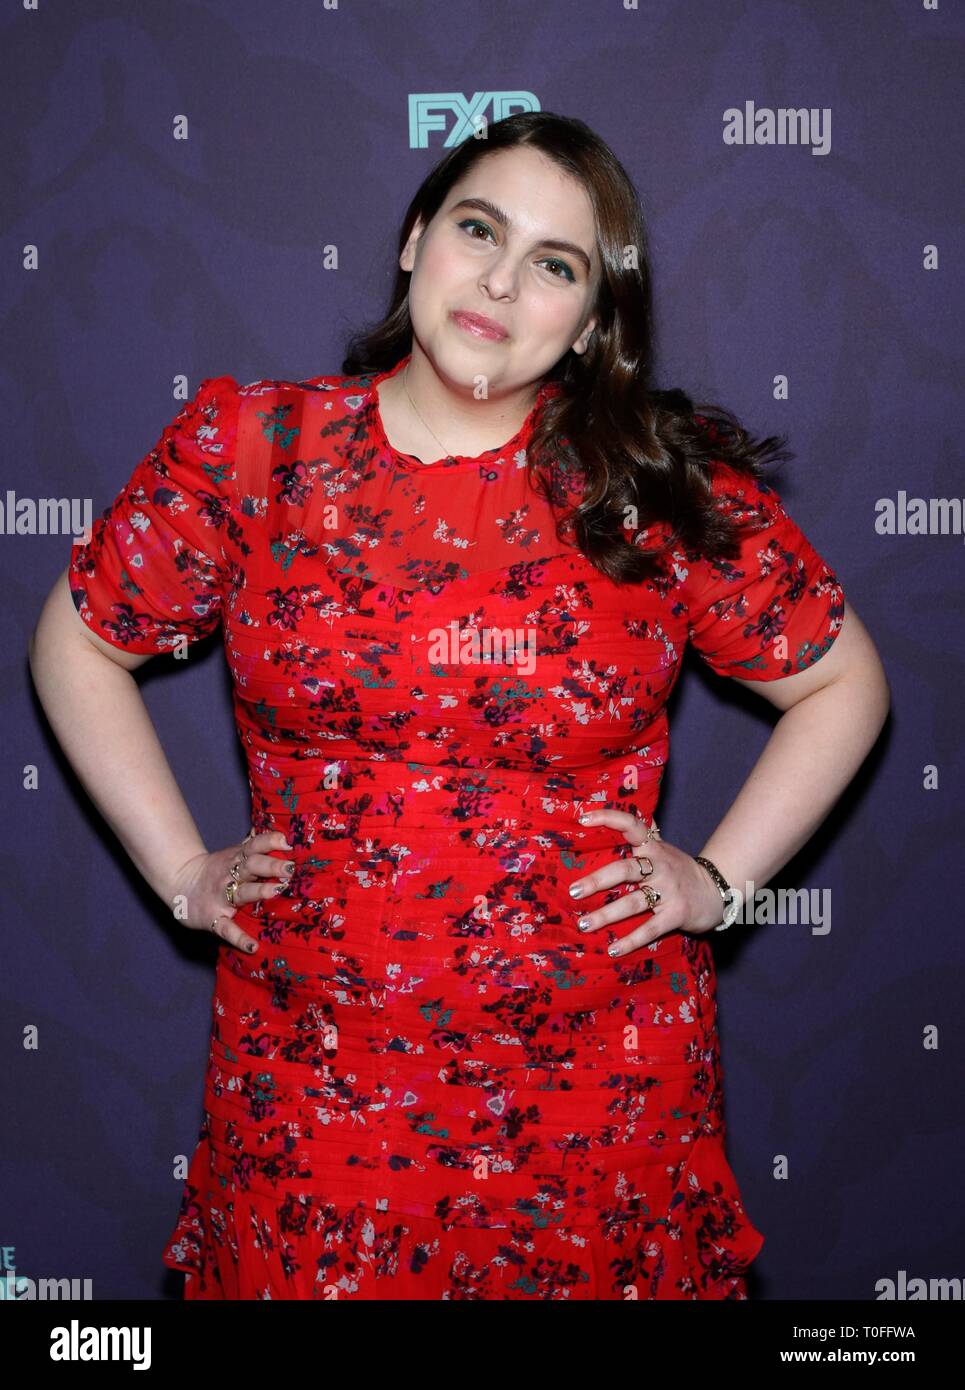 York, USA. 19th Mar, 2019. Beanie Feldstein arrivals for WHAT WE DO THE SHADOWS Series Premiere on FX, New York, NY March 19, 2019. Credit: Eli Winston/Everett Collection/Alamy